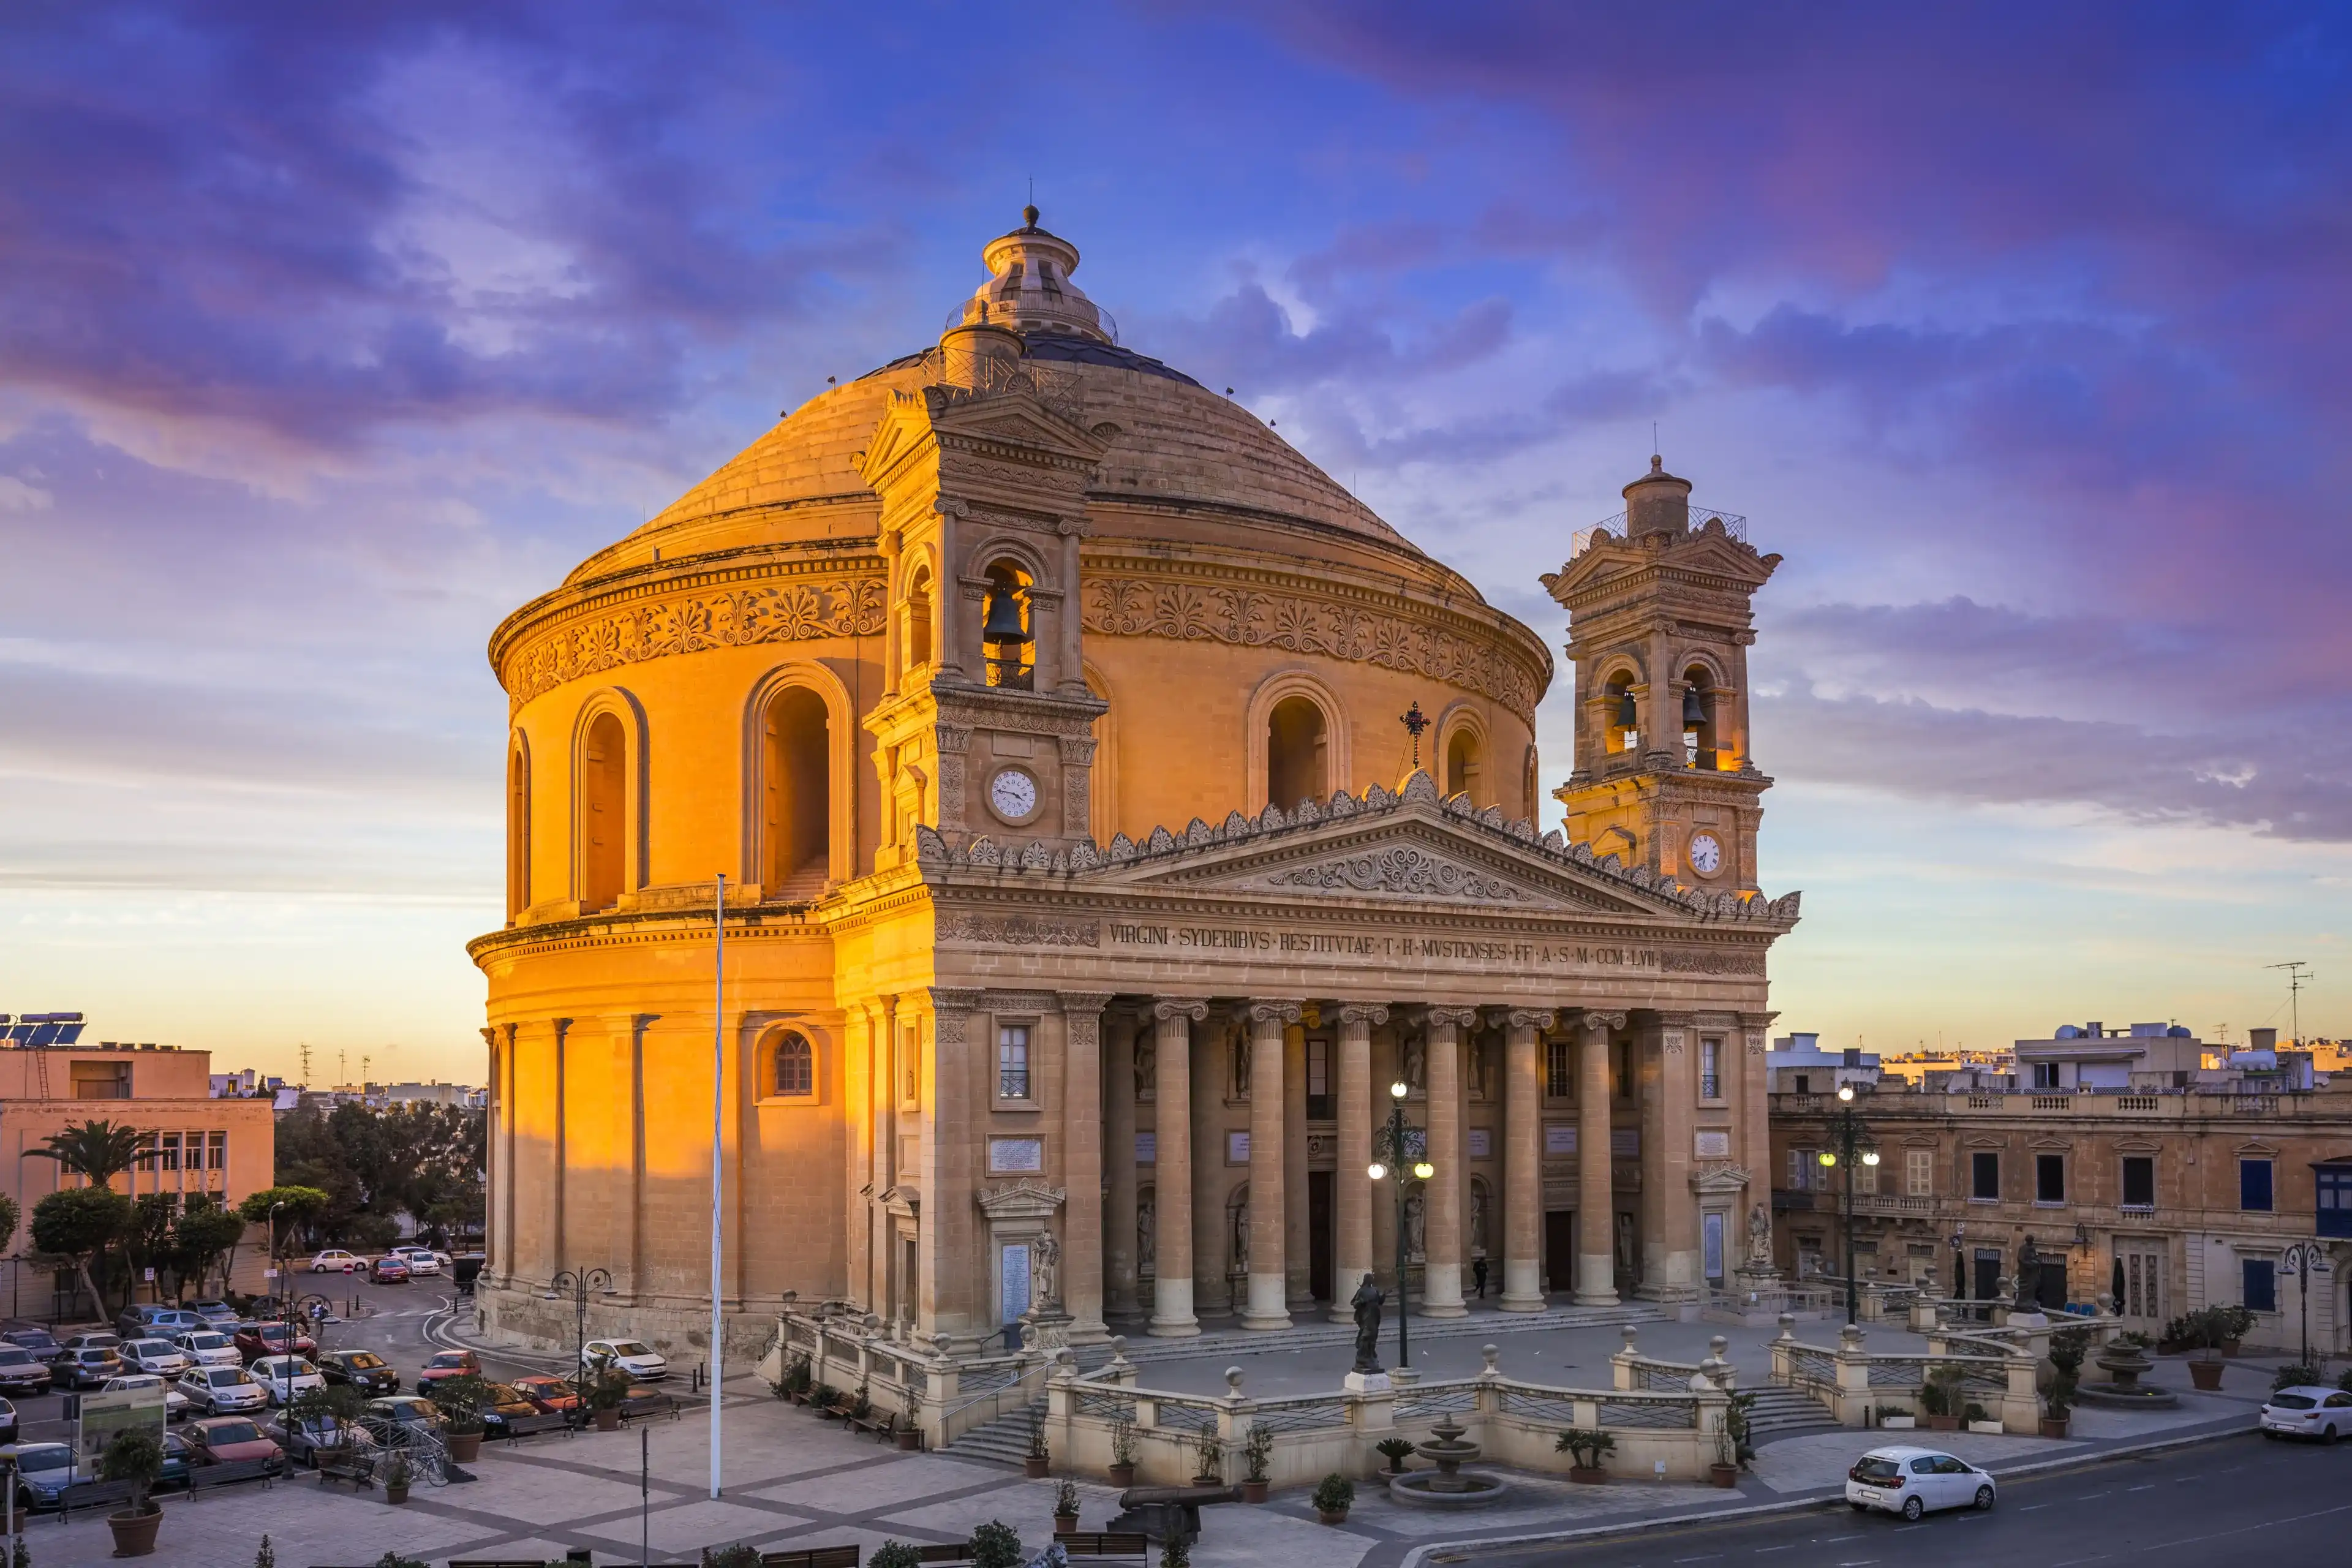 Malta - The famous Mosta Dome at sunset with beautiful sky and clouds